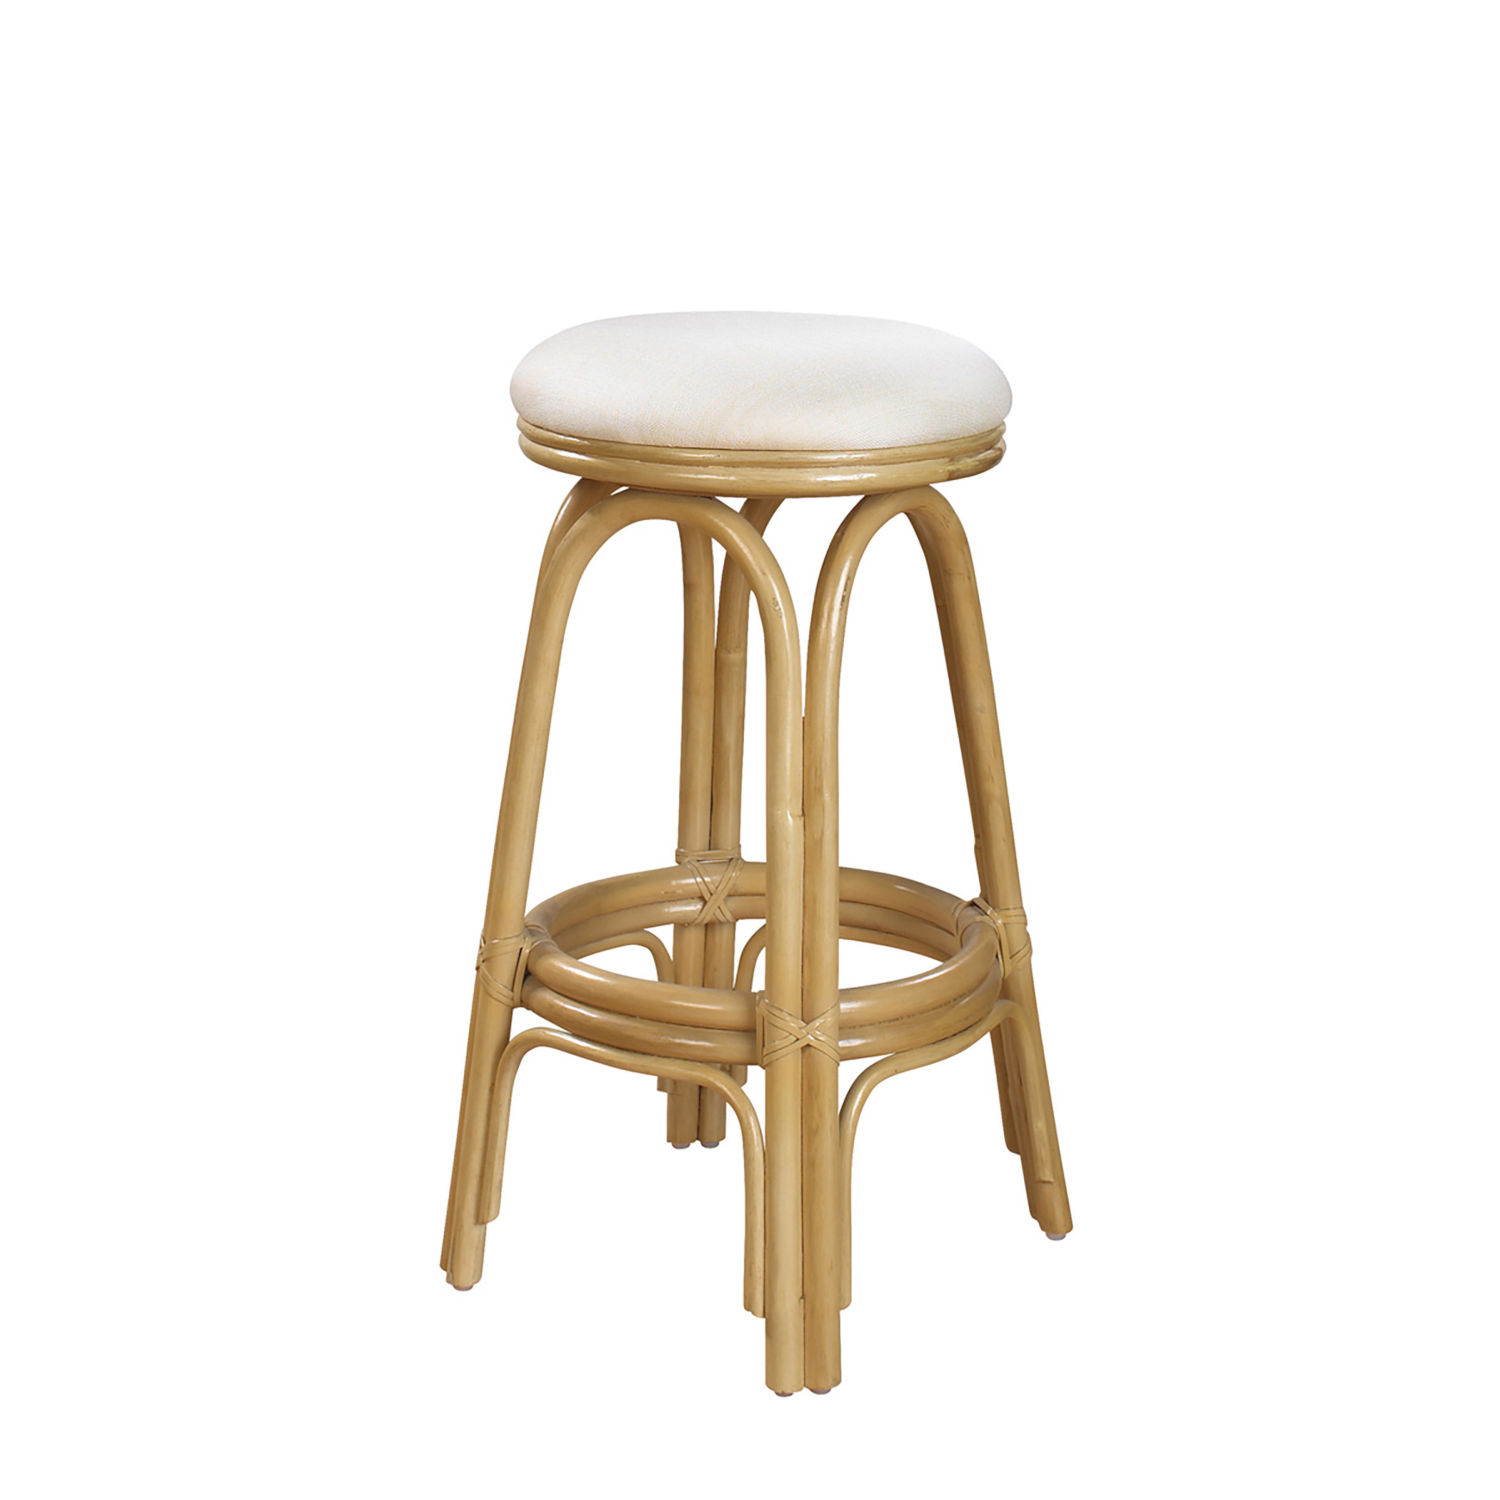 Bar Counter Stools Adjustable, 34 25 In Adjustable Modern Backless Metal Swivel Bar Stool With Wooden Seat